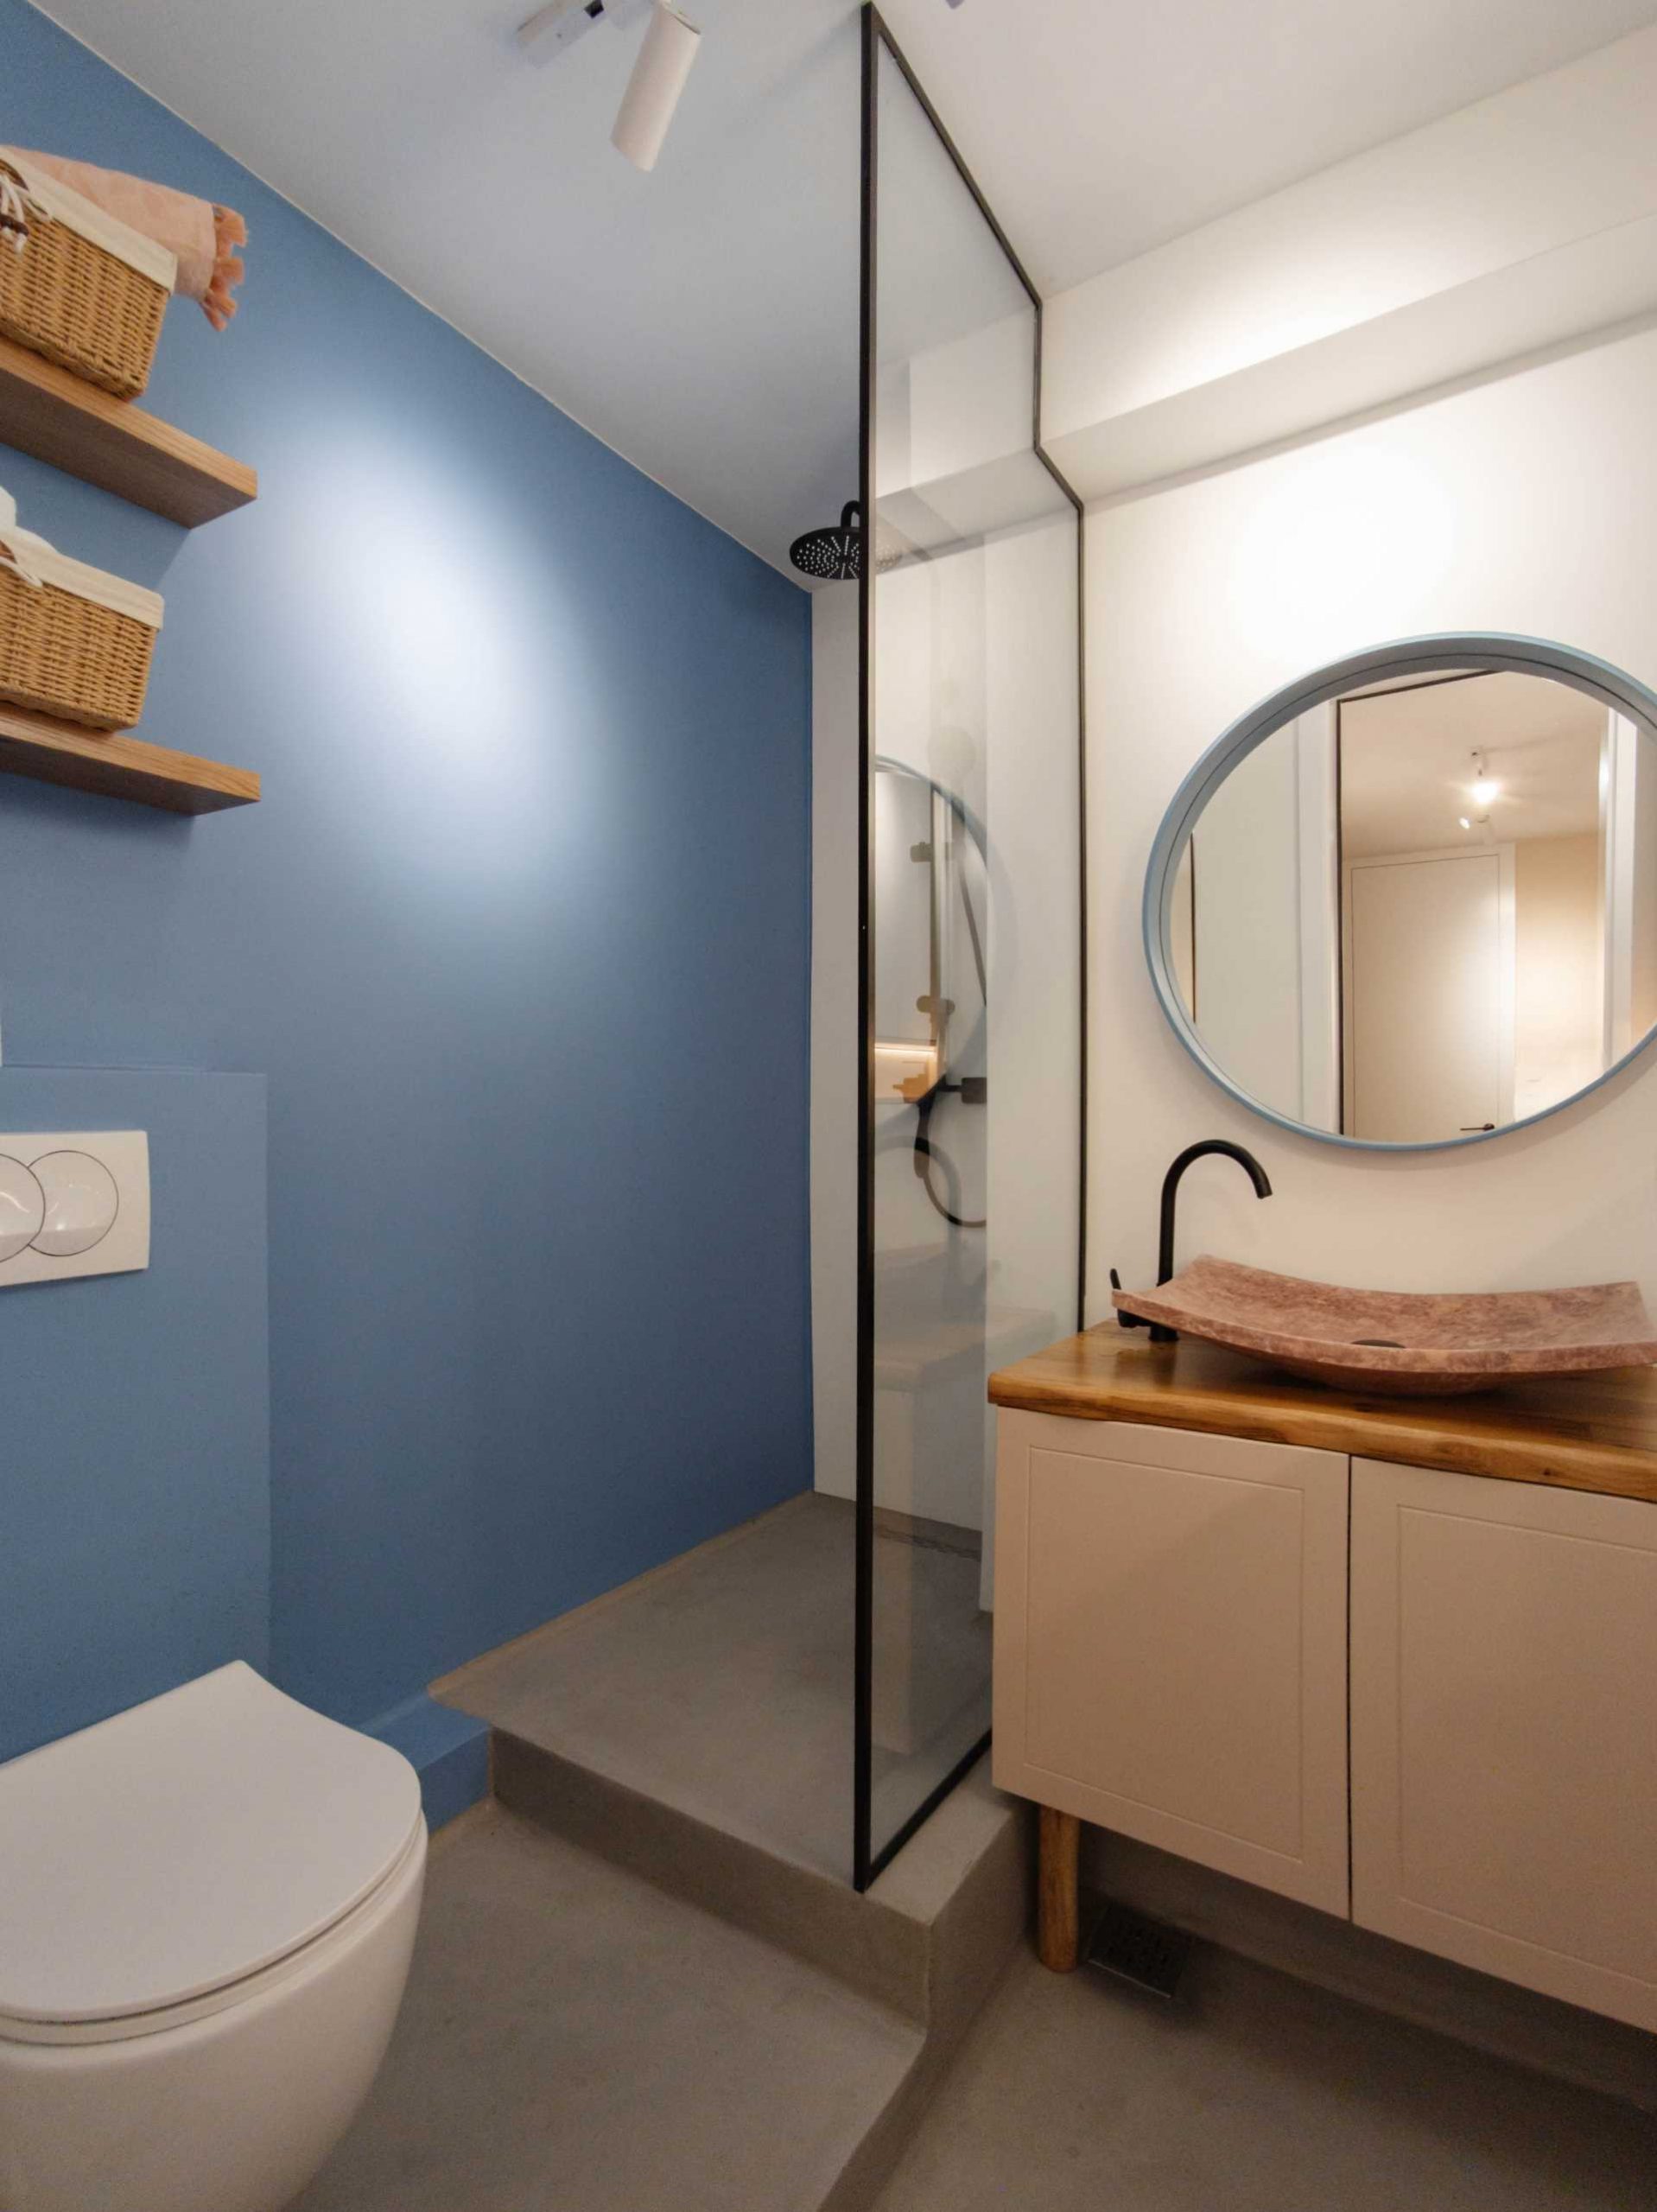 In this small and contemporary bathroom, the shower has a matte blue wall and a black framed glass shower screen. There's also floating wood shelves, a wood vanity with a blue-framed round mirror above, and a built-in cabinet with a shelving niche.